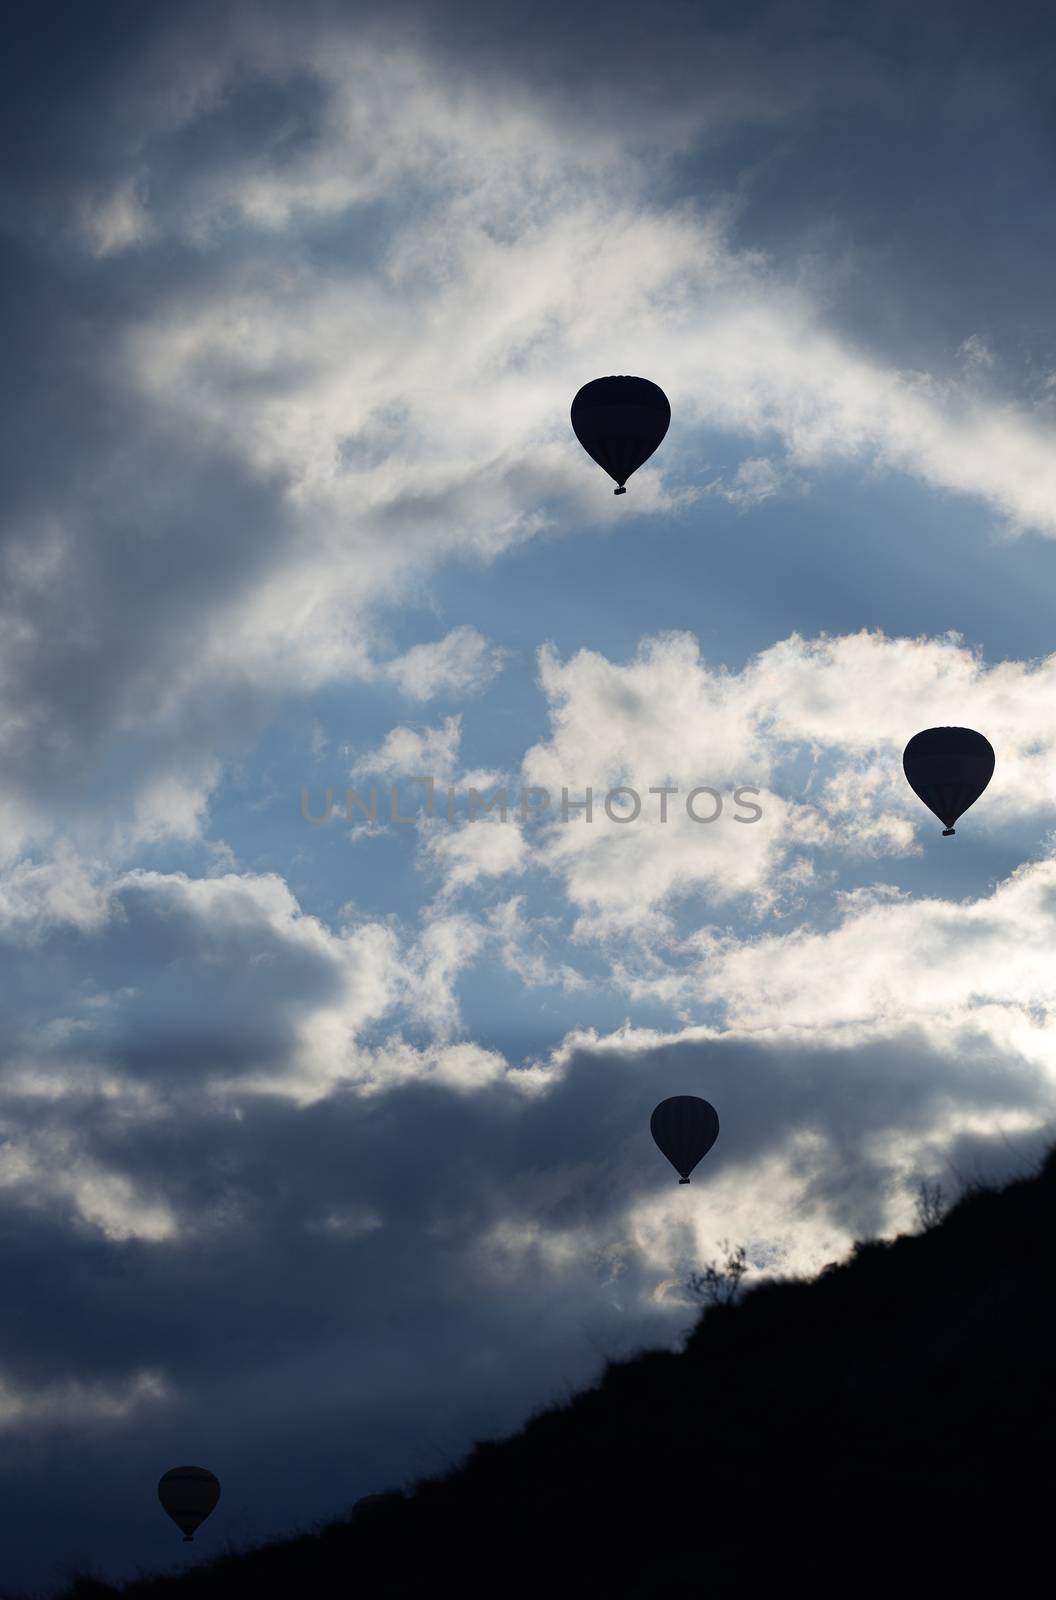 Silhouettes of the hot air balloons flying over the mountain